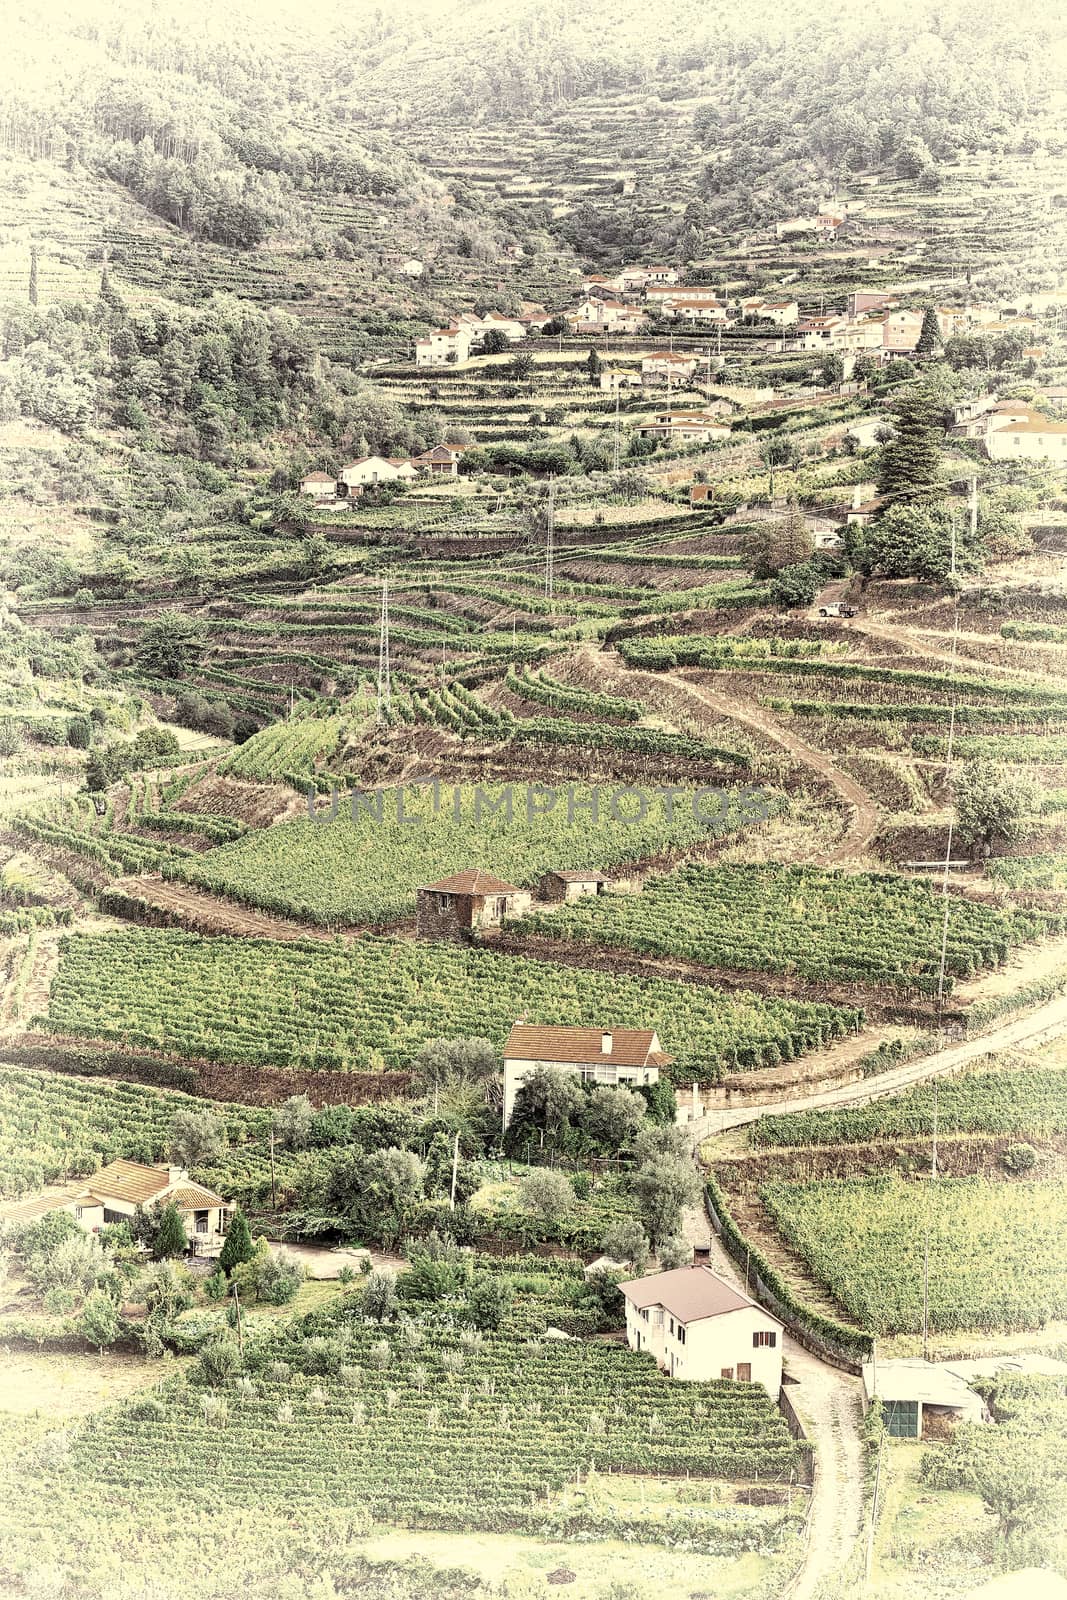 Vineyards on the Hills of Portugal, Retro Image Filtered Style